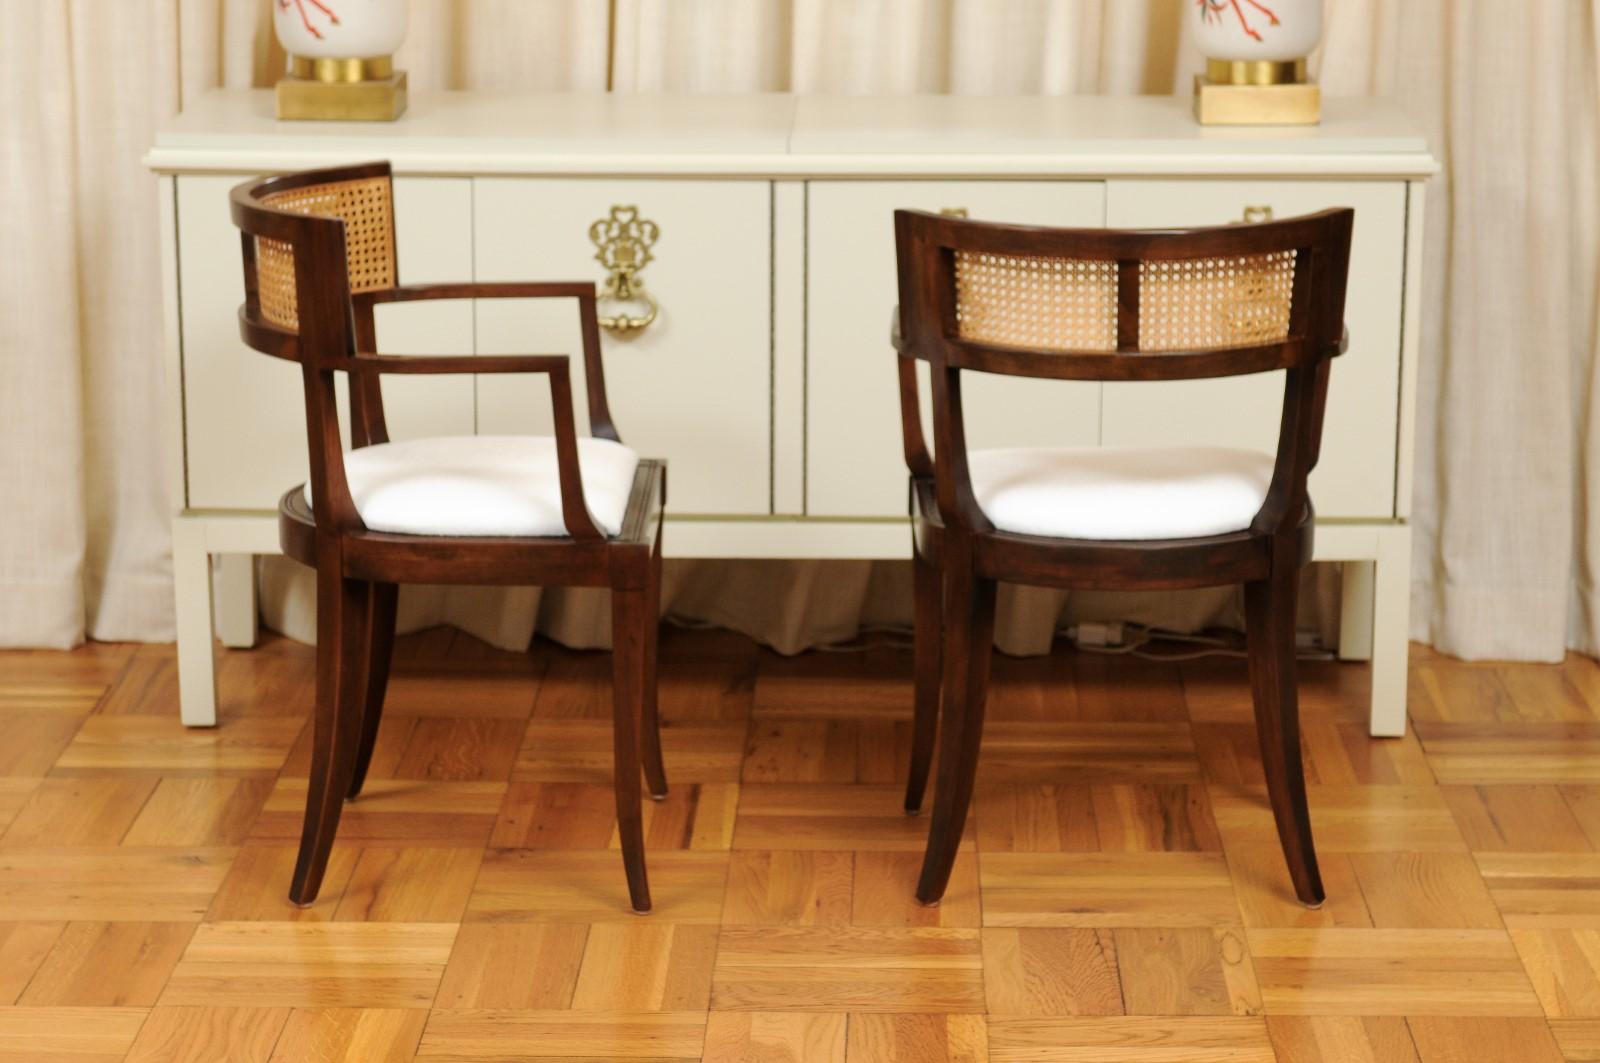 All Arms, Exquisite Set of 20 Klismos Cane Dining Chairs by Baker, circa 1958 For Sale 2